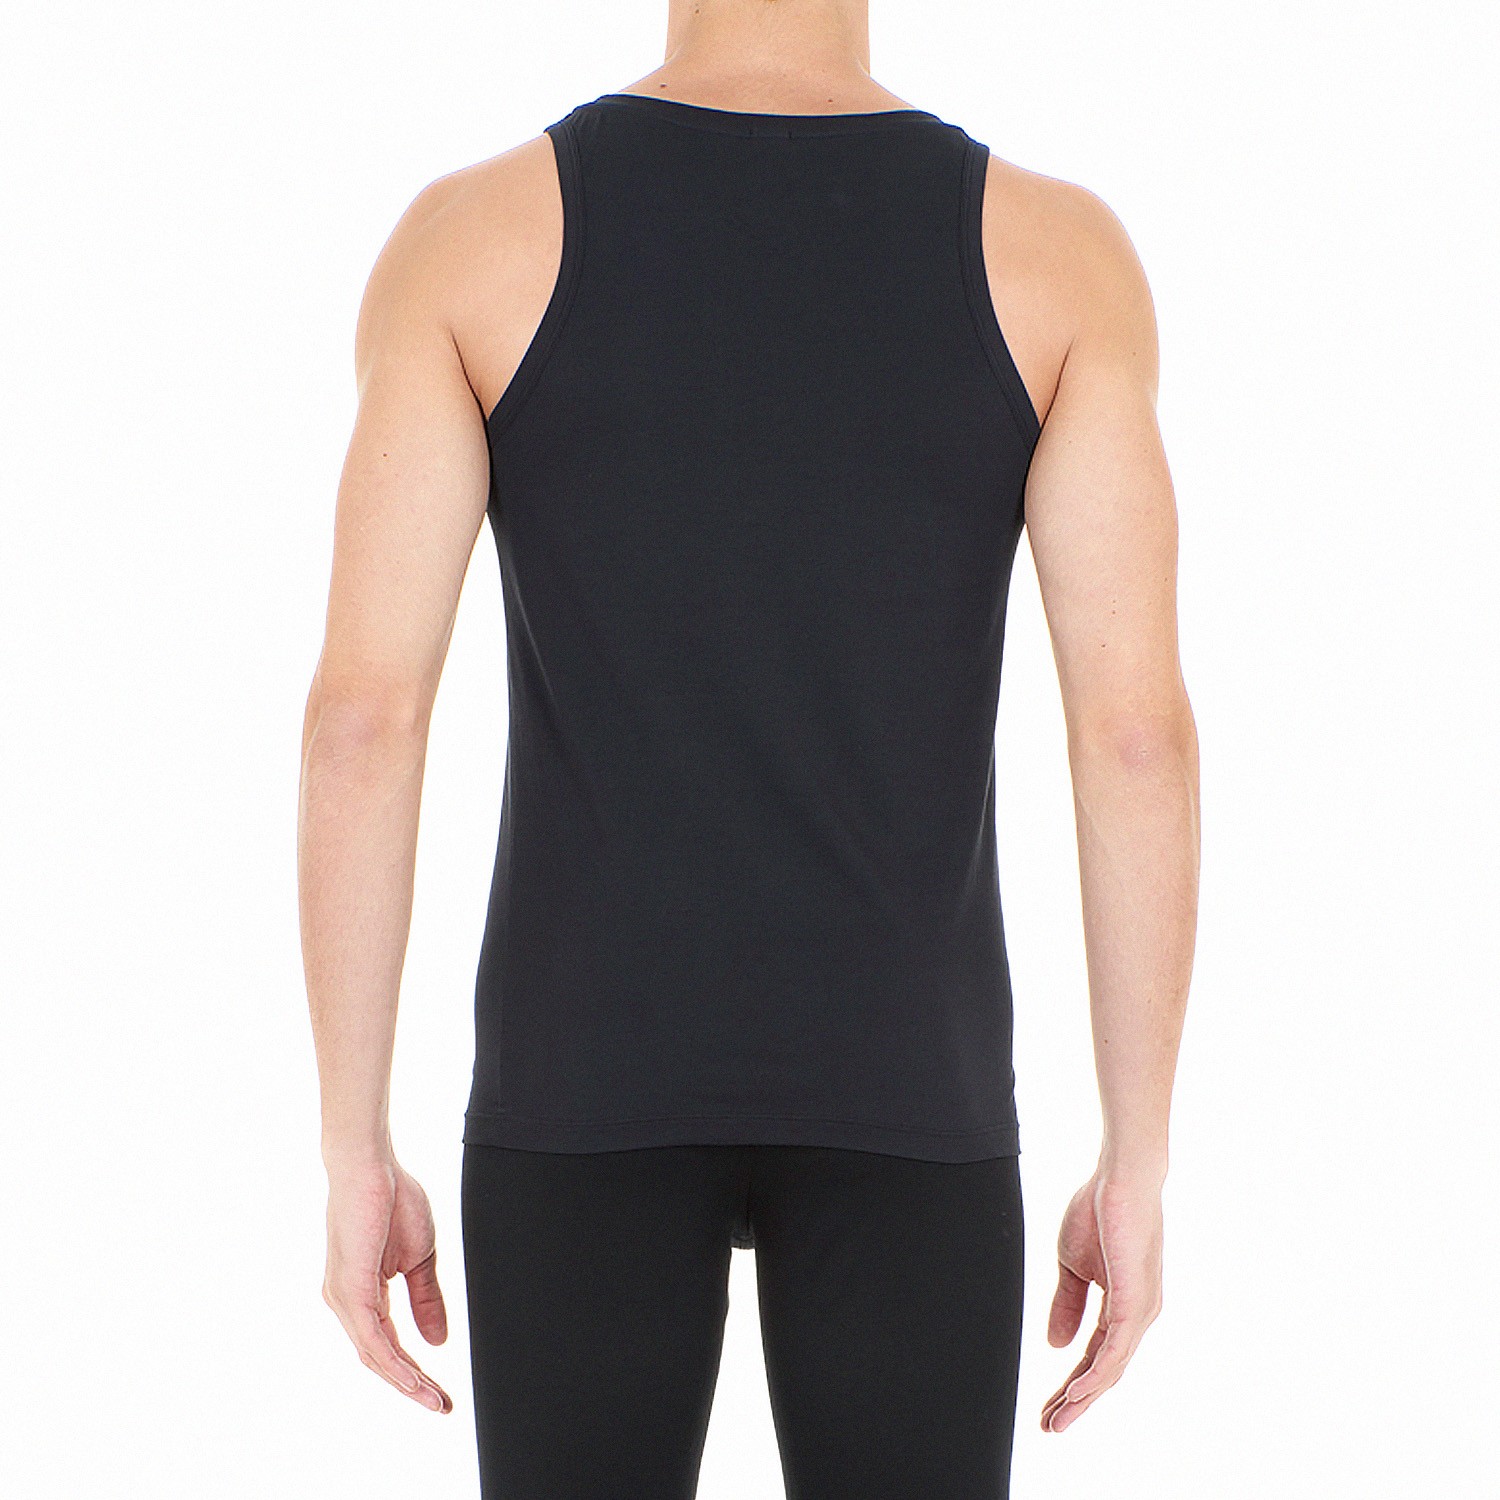 Supreme Cotton - black tank top: Tank top for man brand HOM for sal